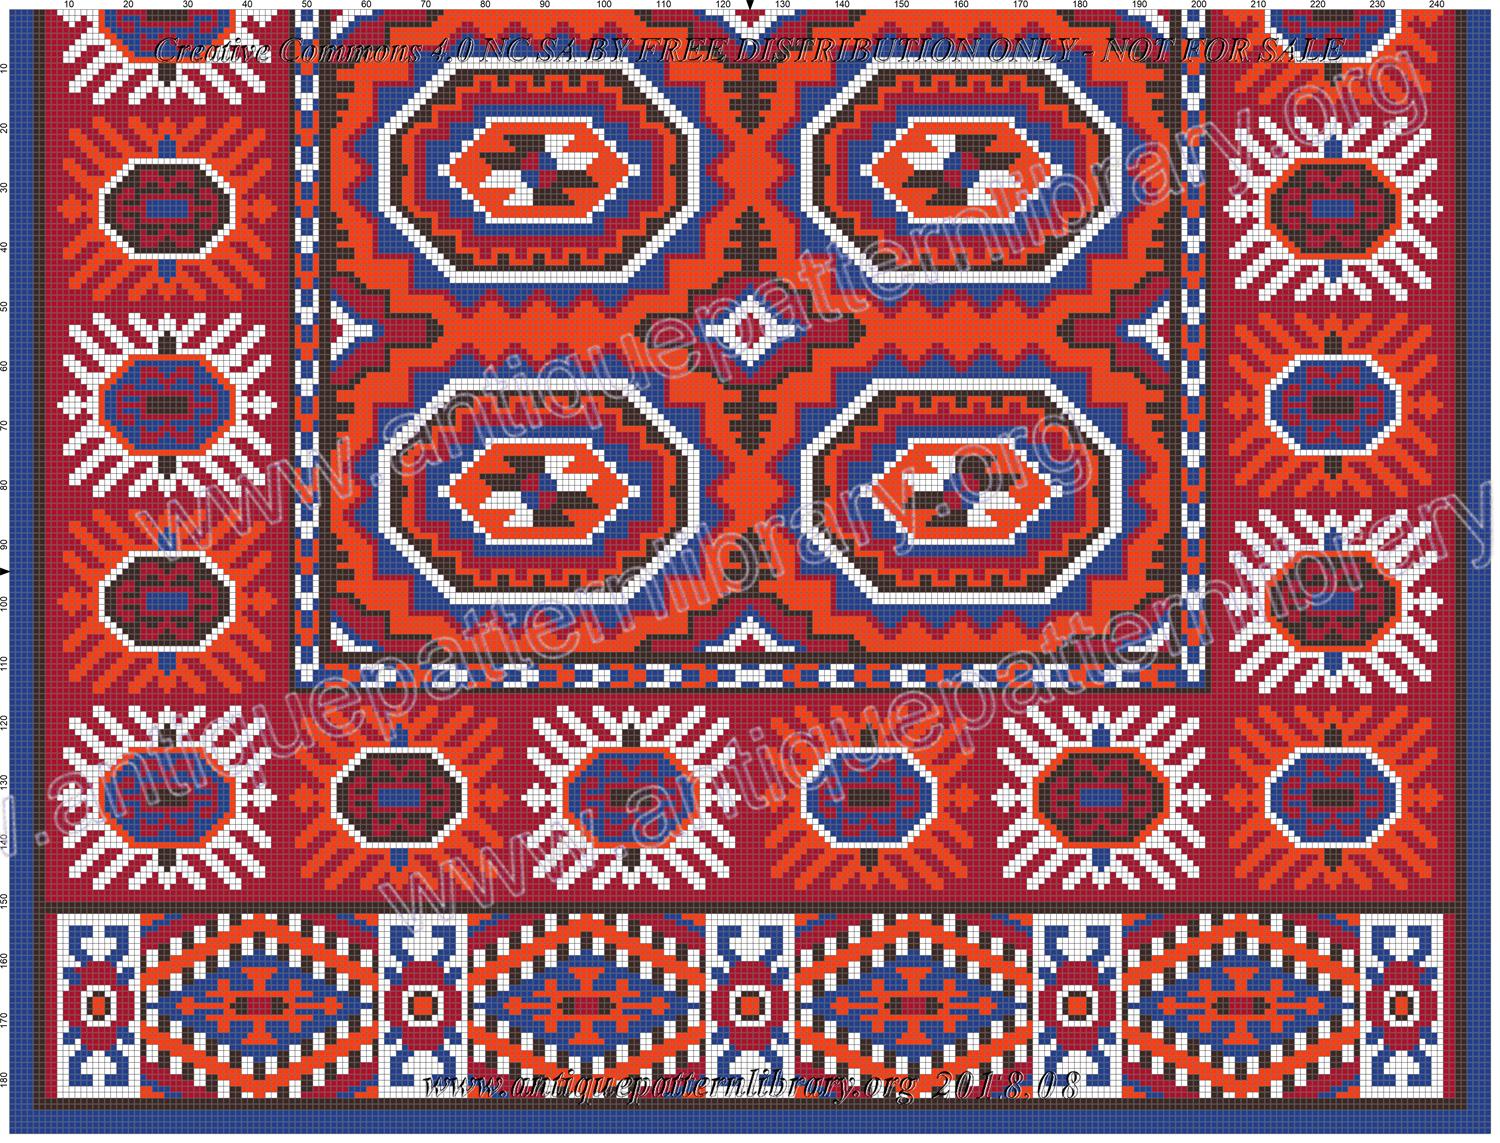 A-MH004 Tapestry design, medaillons in rectangles